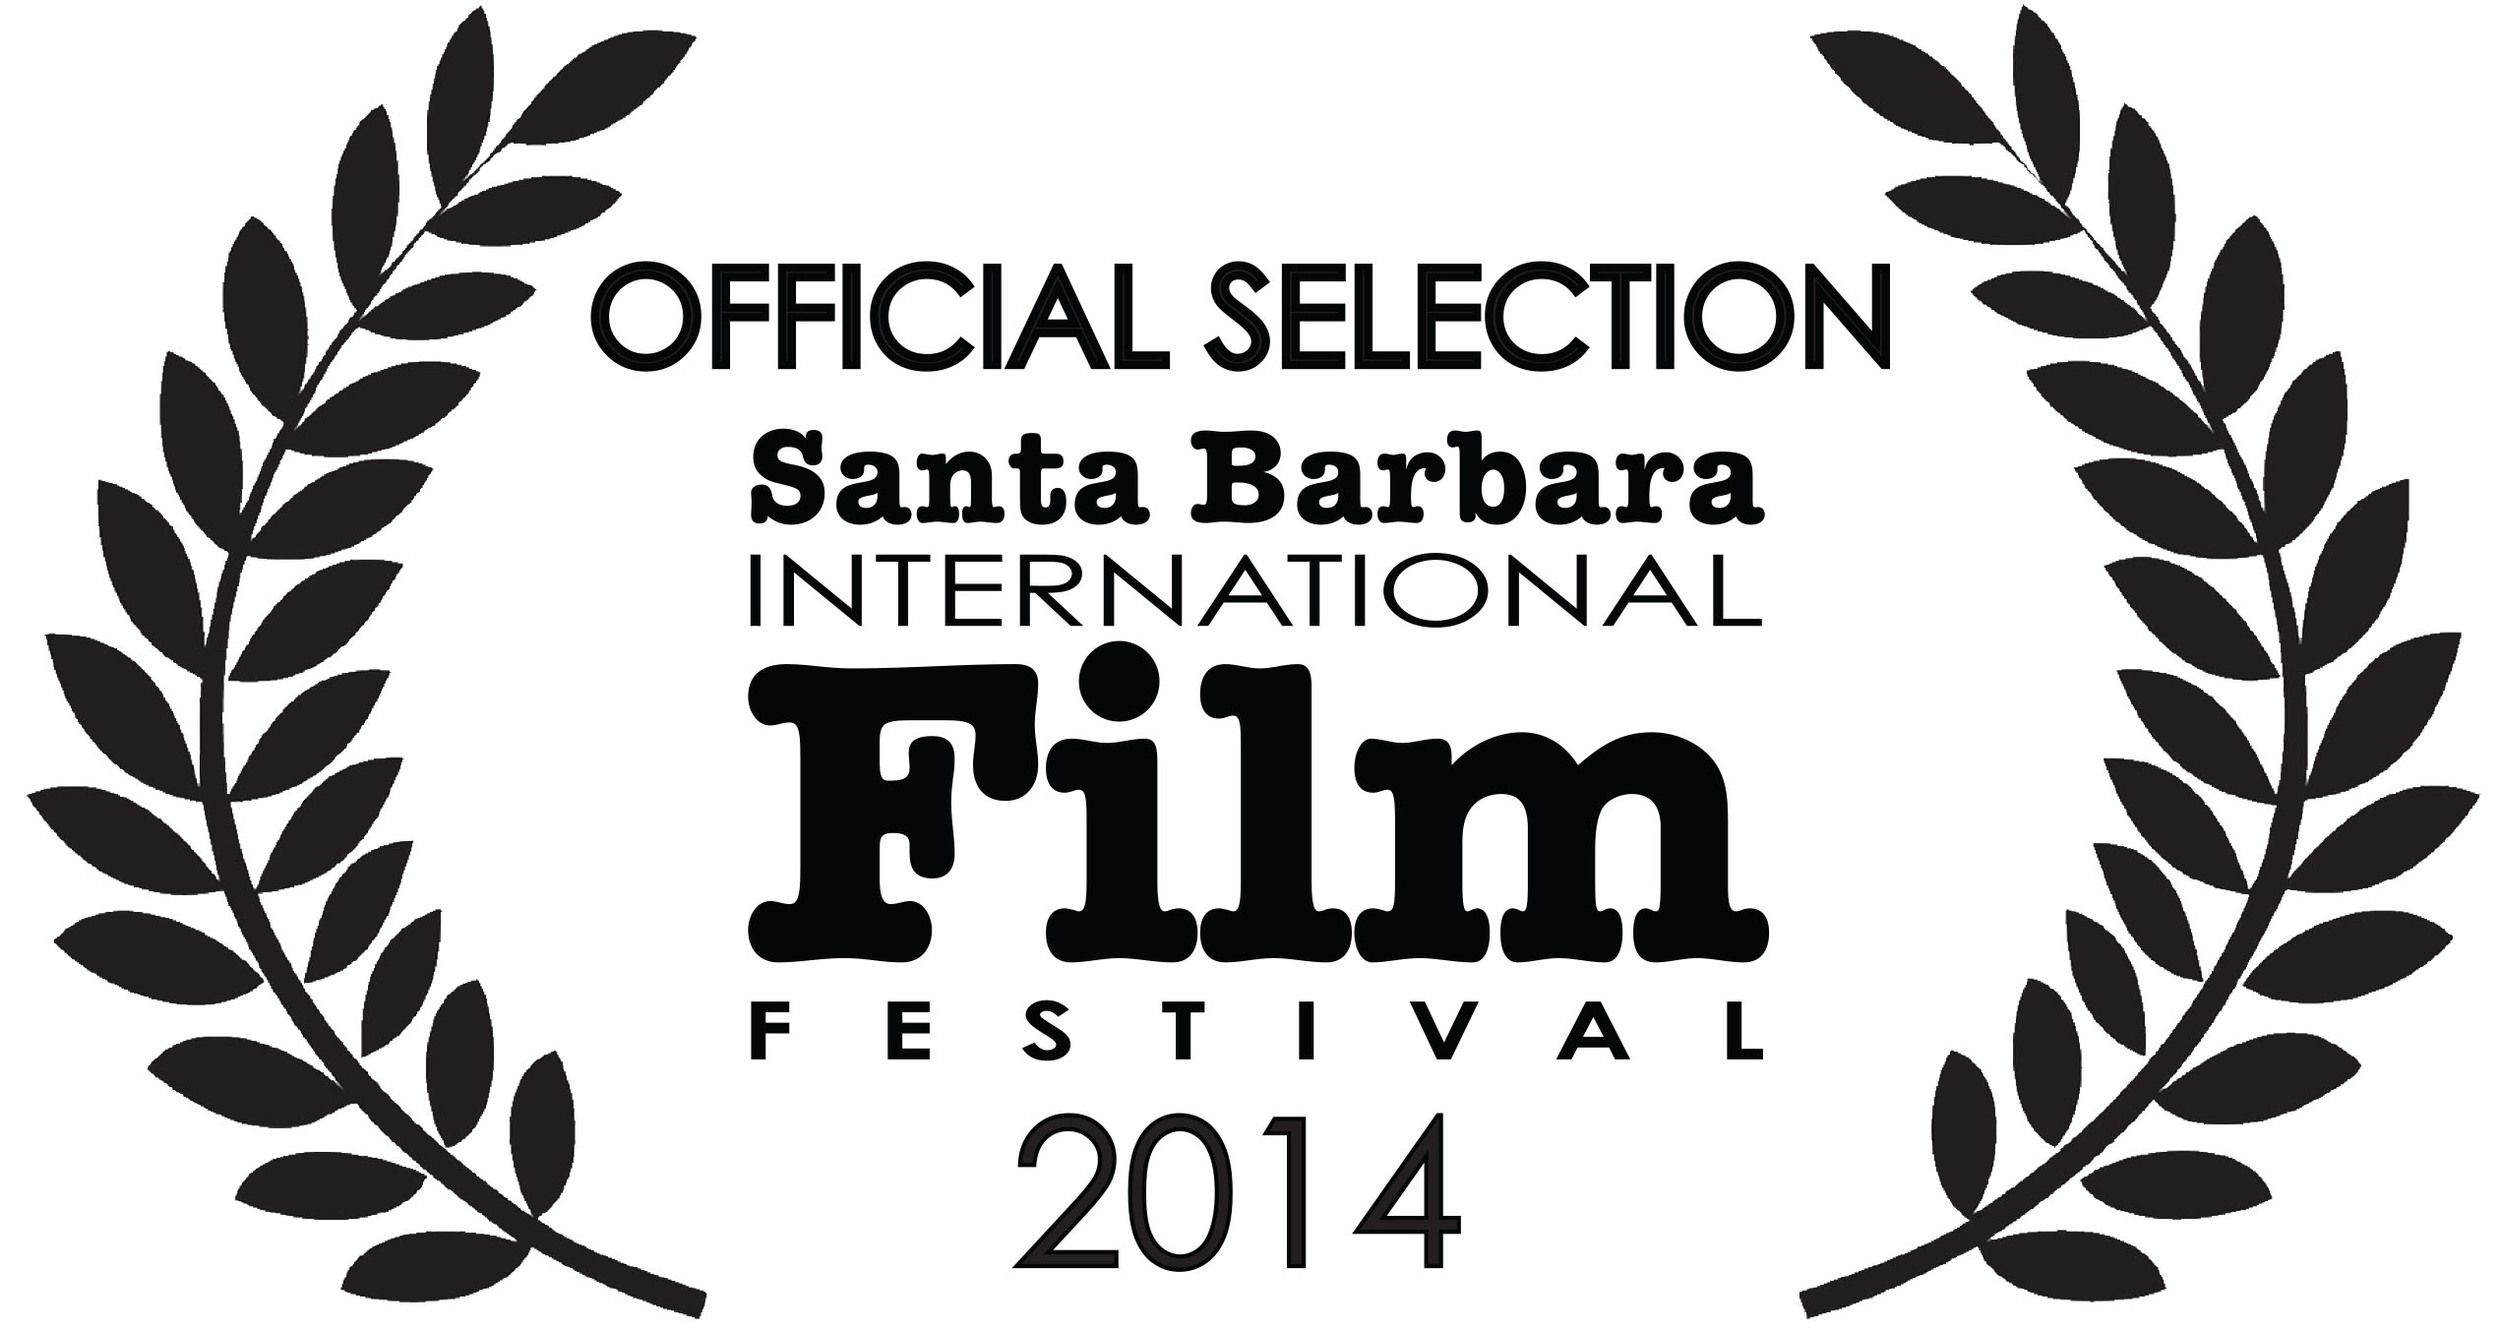 SBIFF 2014 Official Selection.jpg